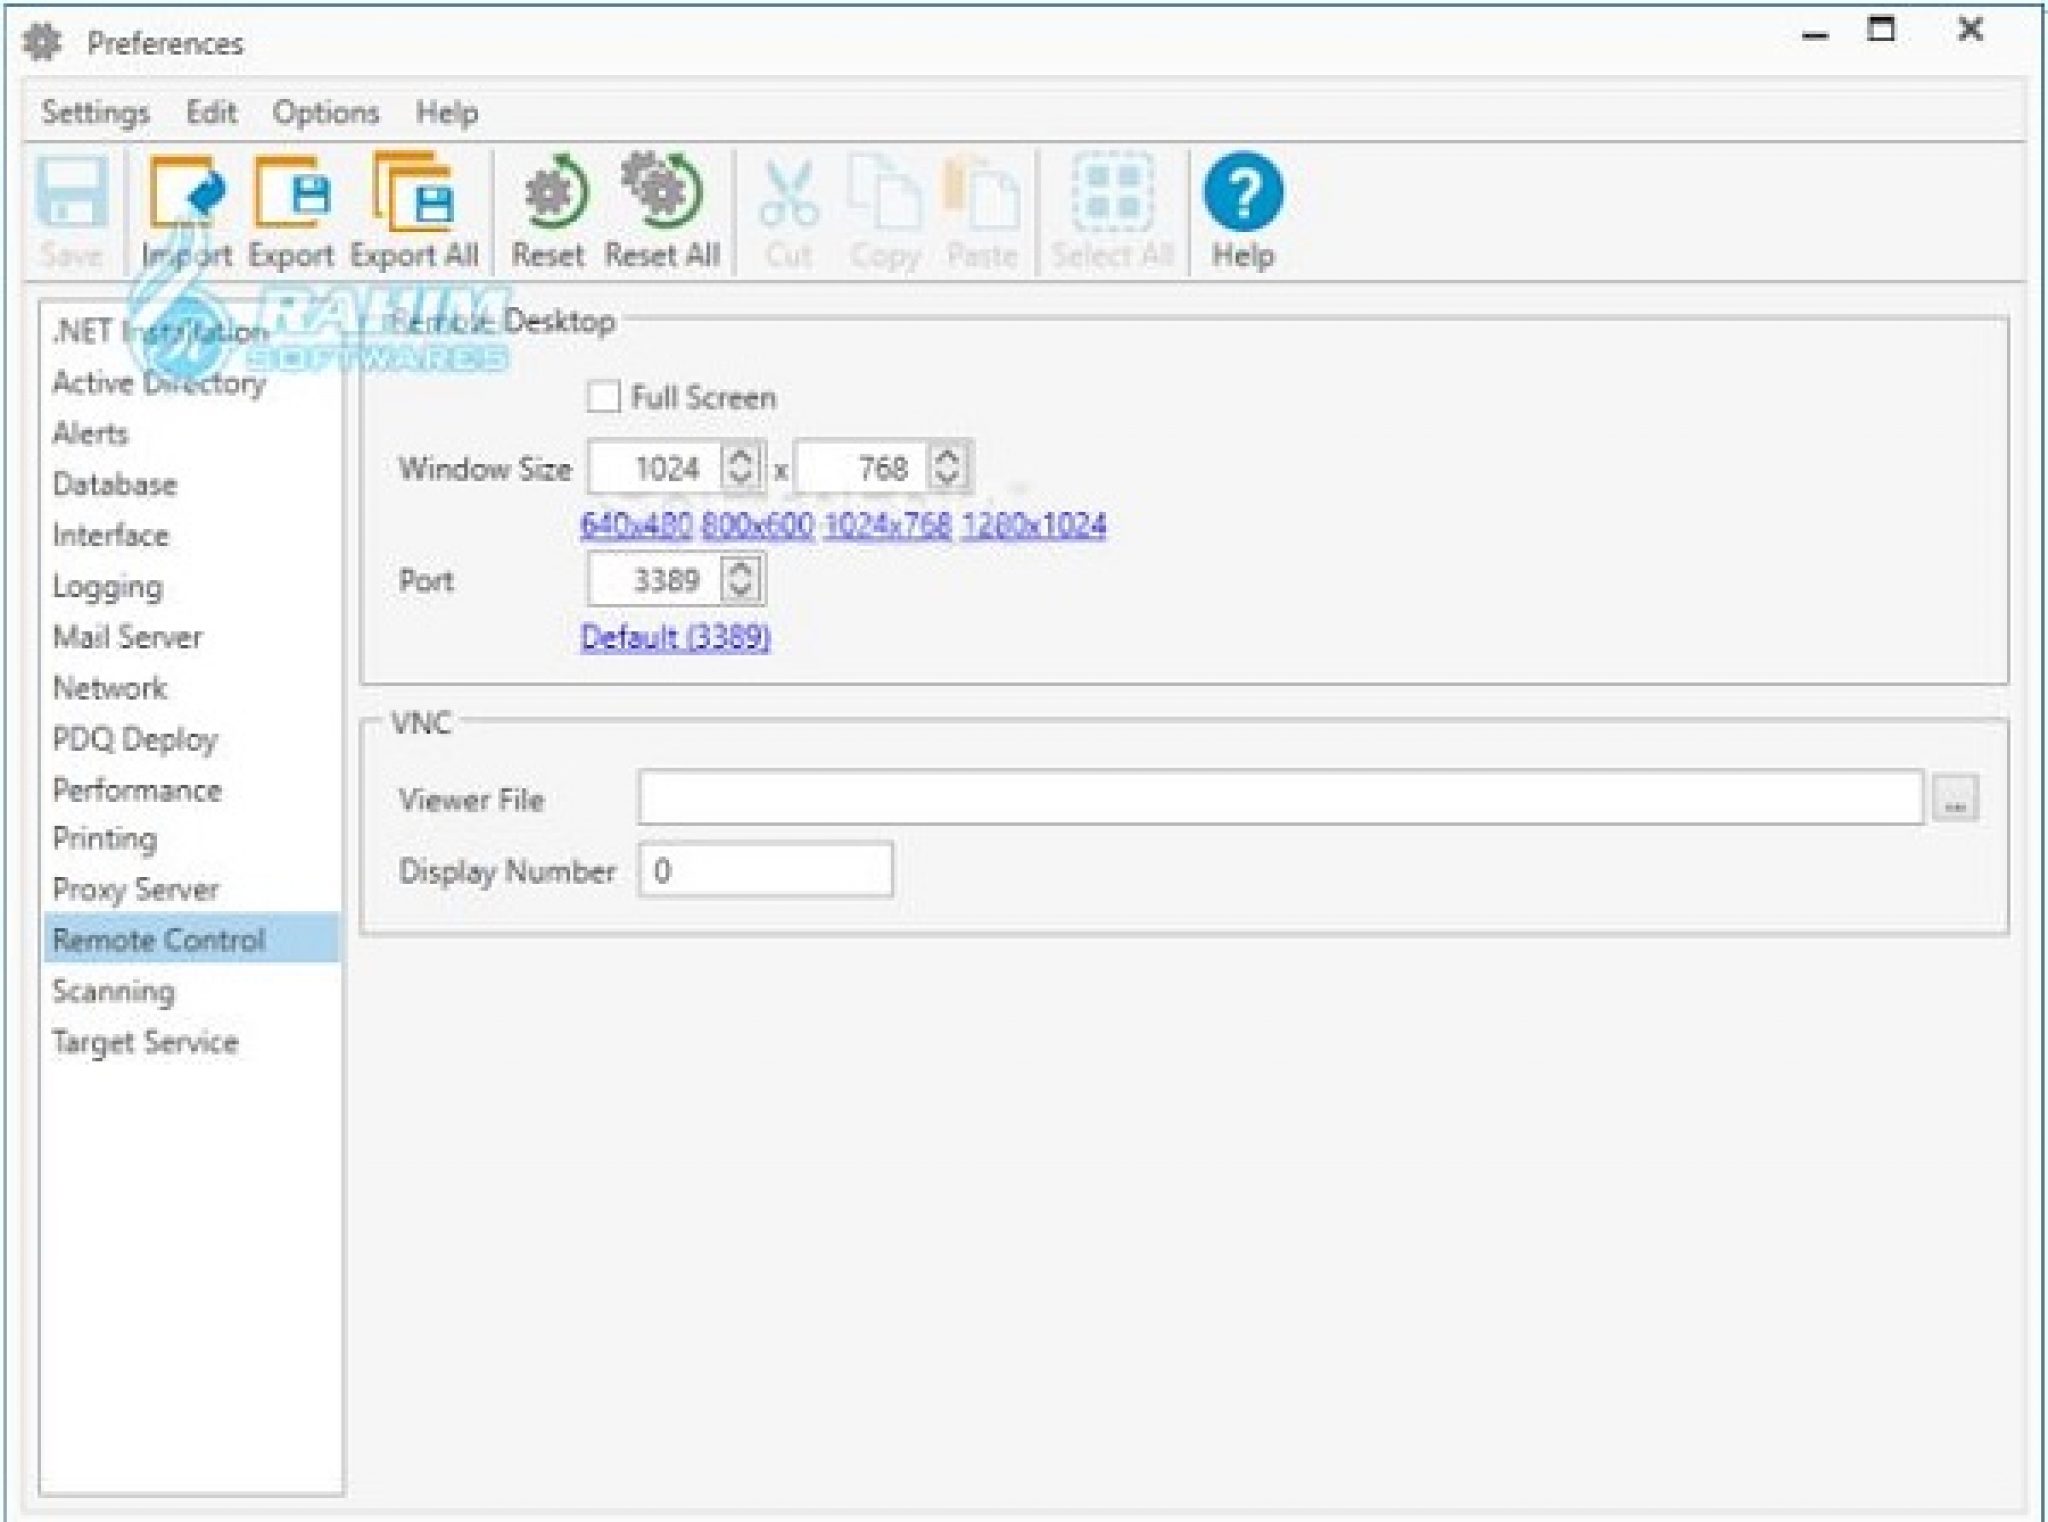 download the new version PDQ Inventory Enterprise 19.3.472.0